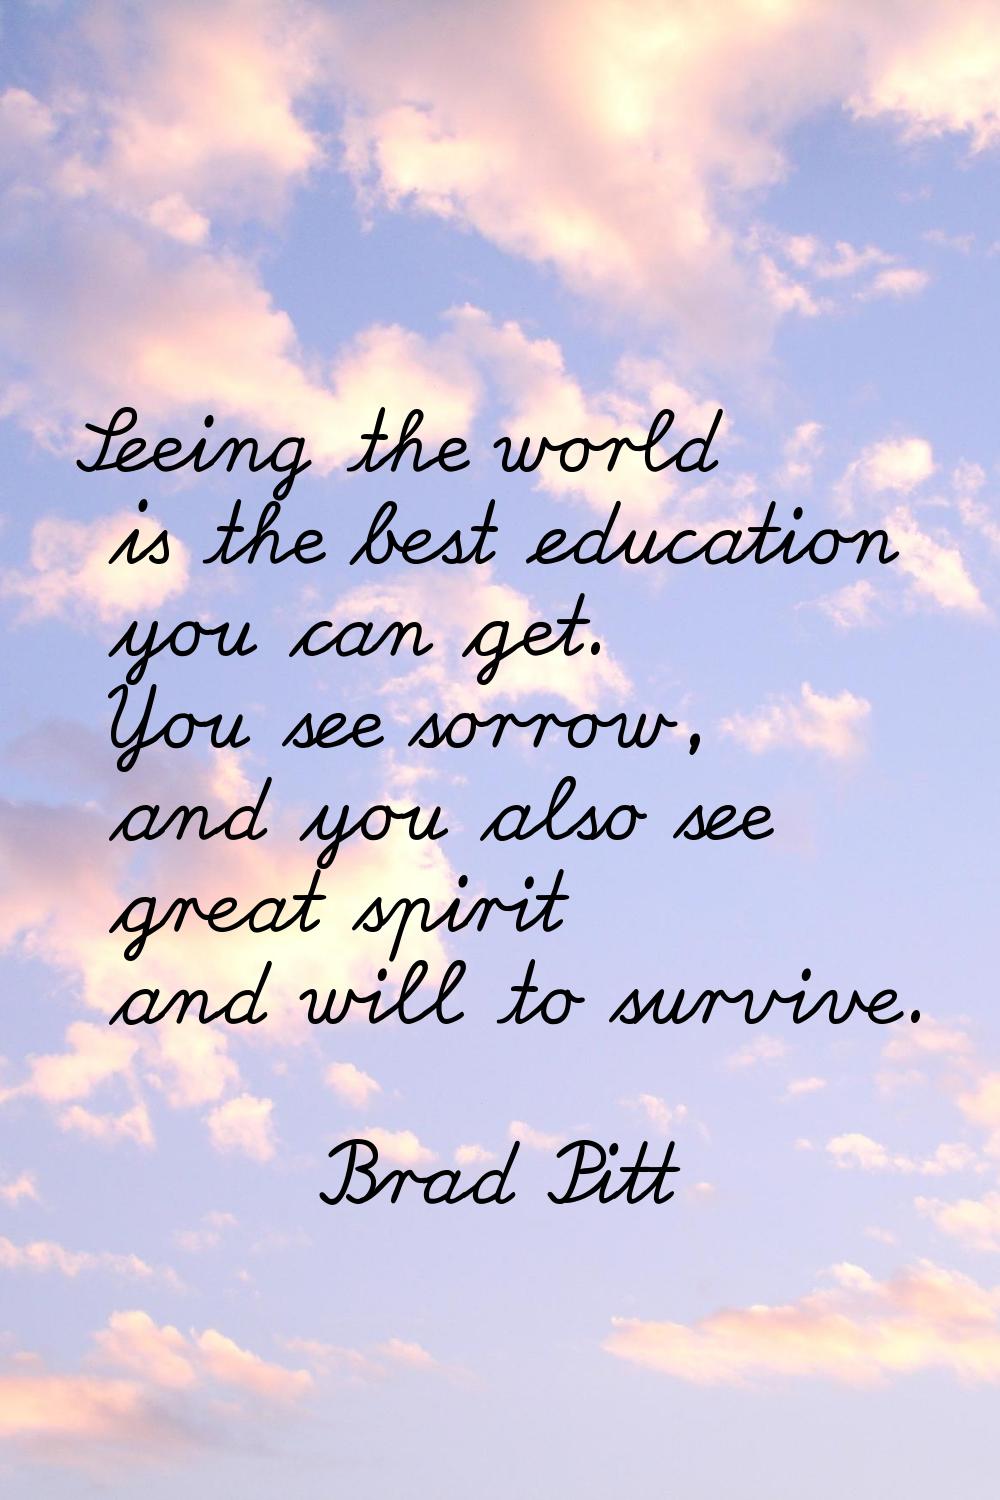 Seeing the world is the best education you can get. You see sorrow, and you also see great spirit a